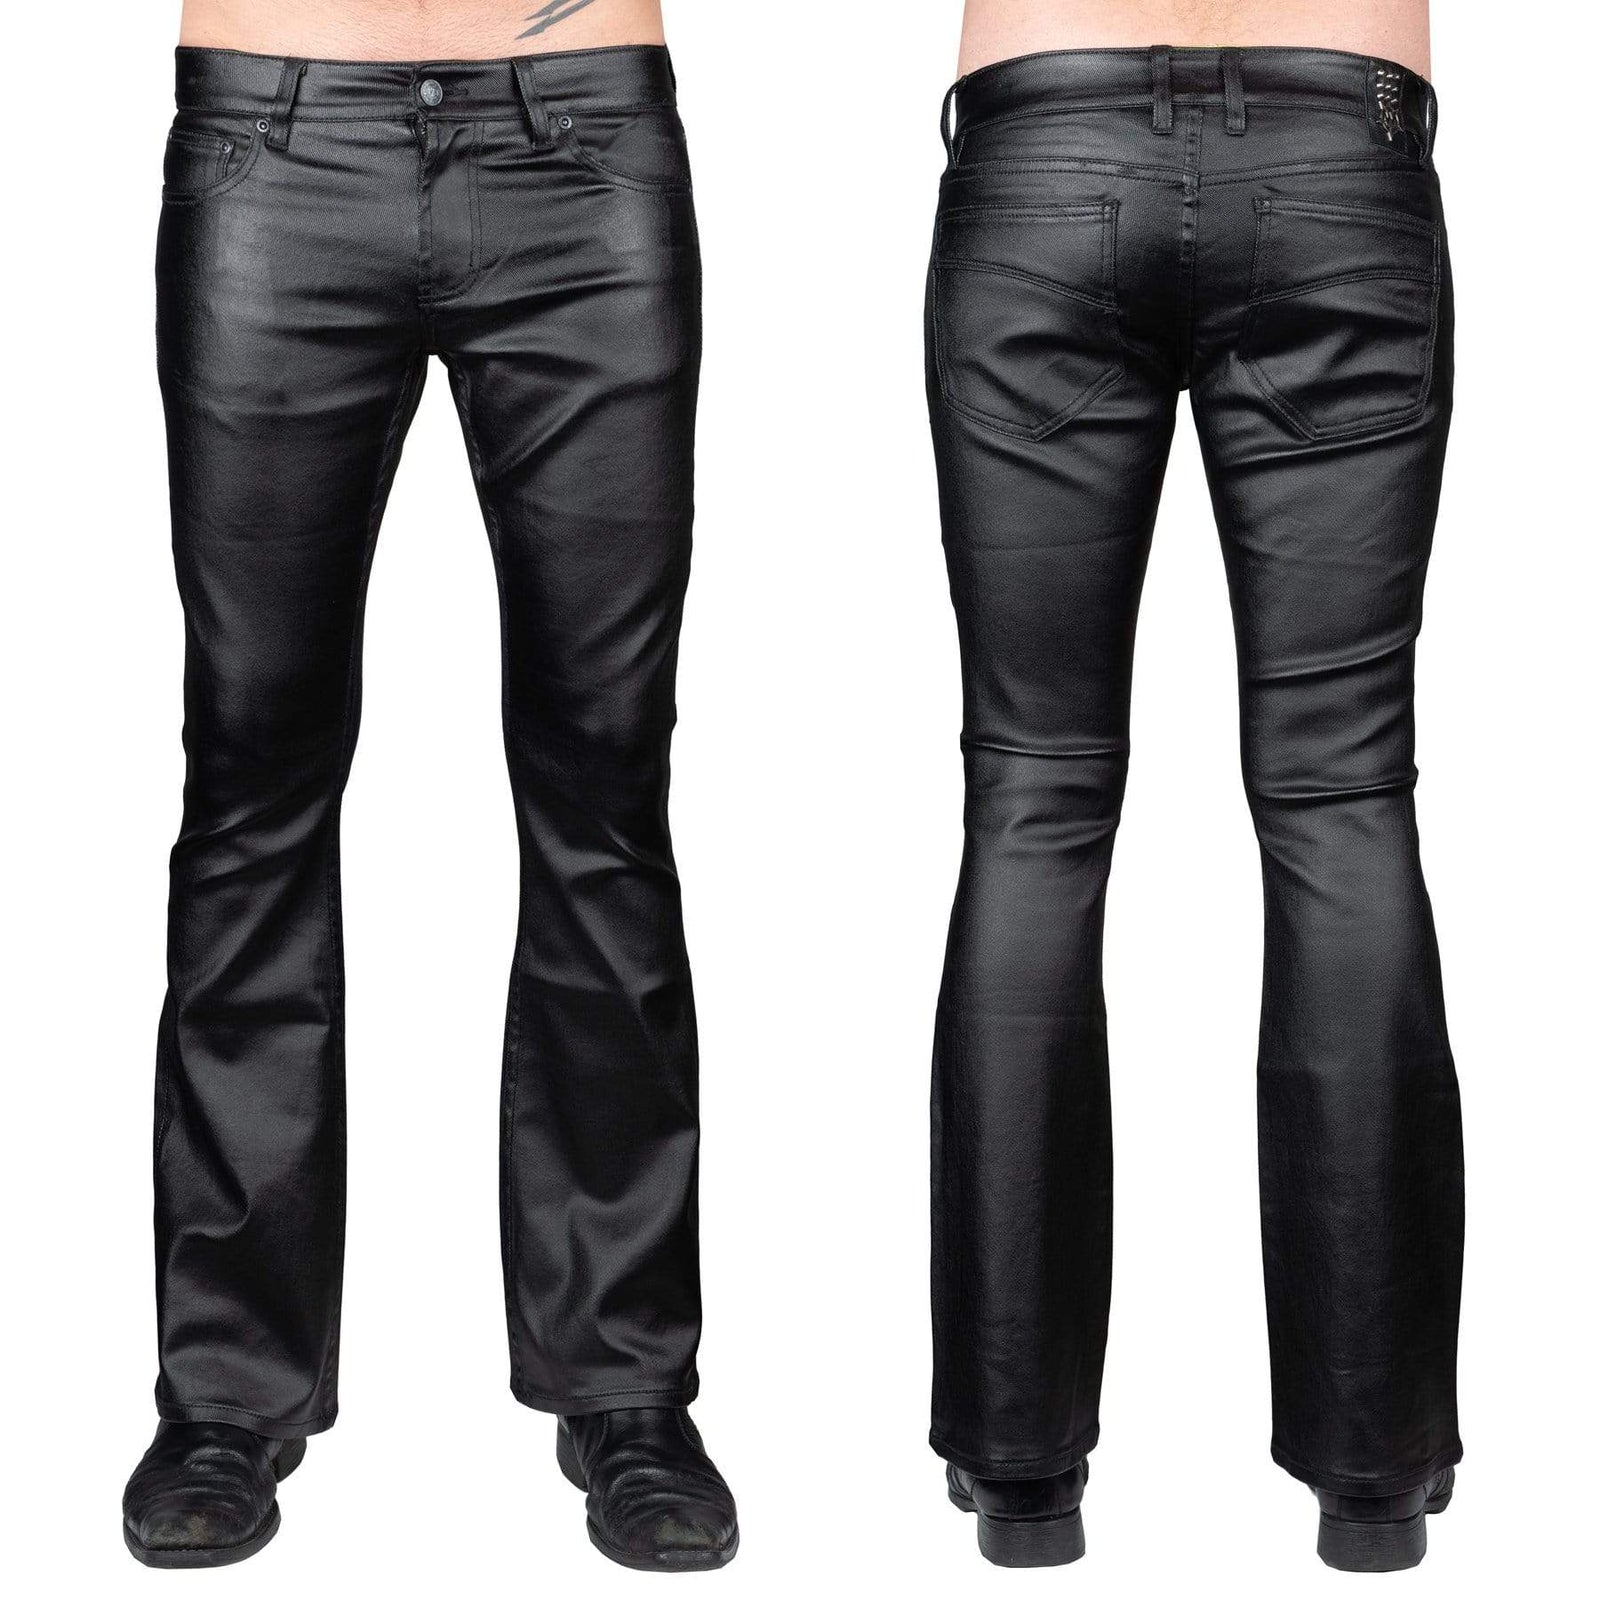 All Access Collection Pants Hellraiser Waxed Denim Jeans